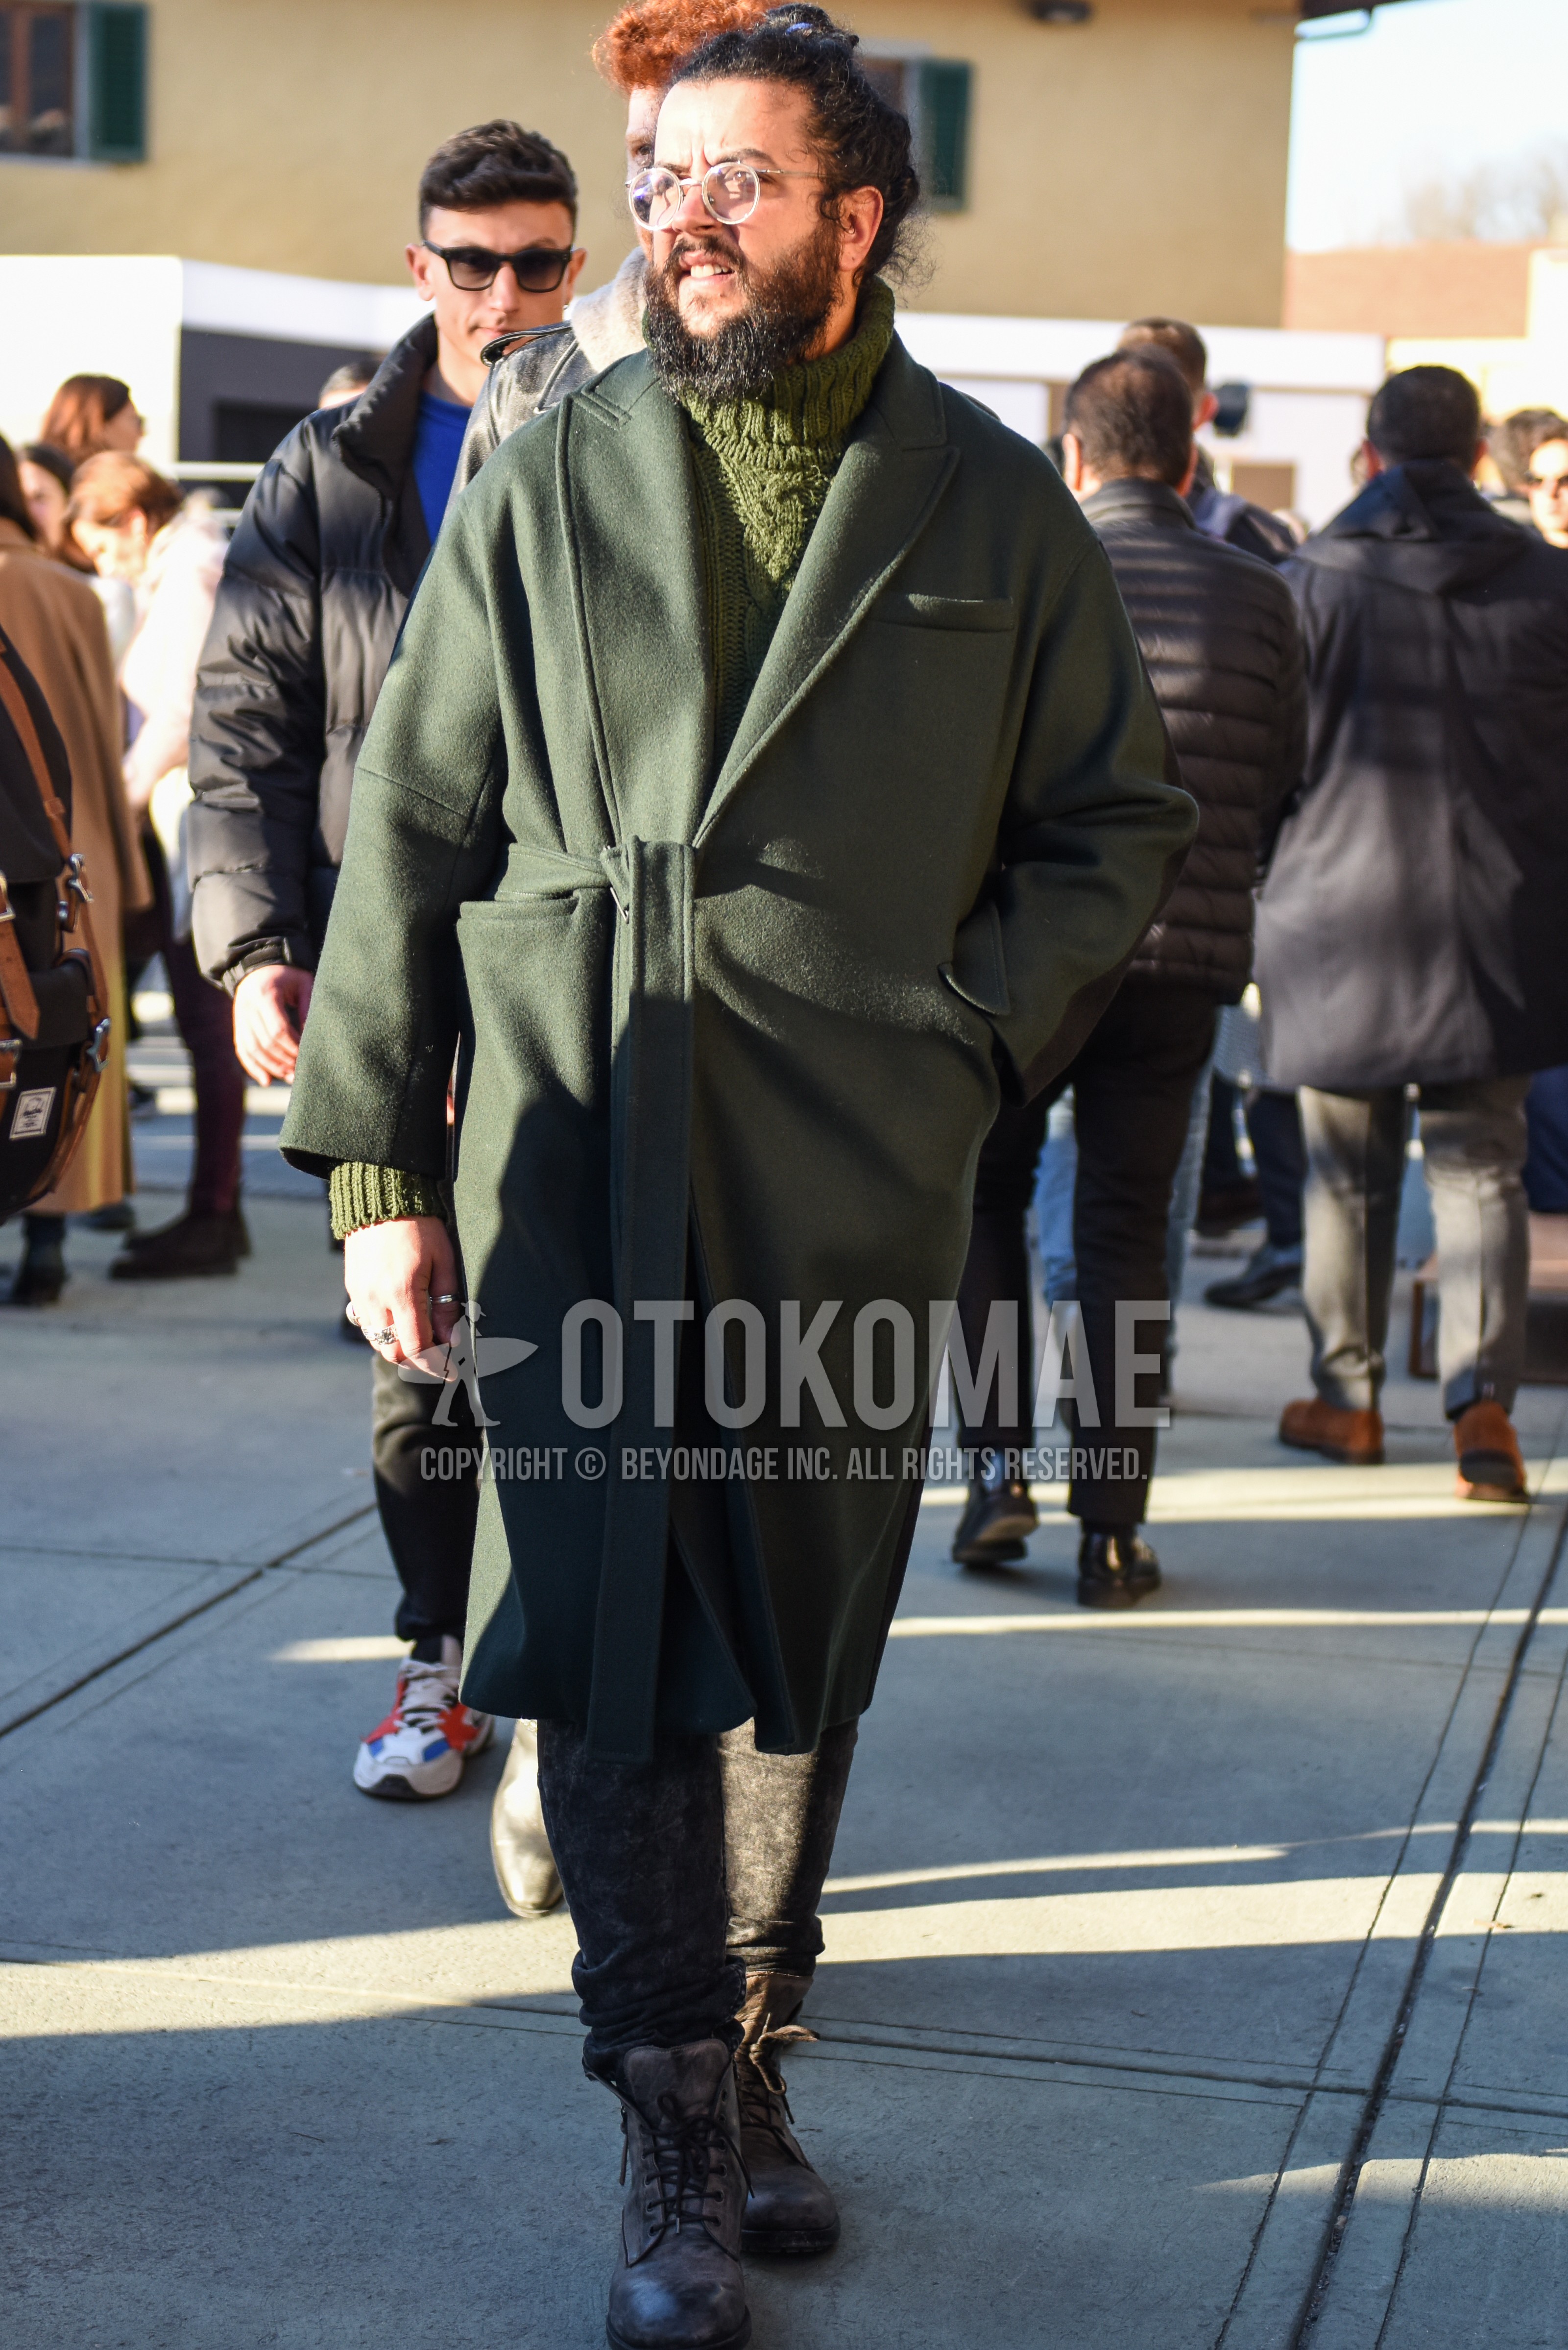 Men's autumn winter outfit with clear plain glasses, olive green plain chester coat, olive green plain belted coat, olive green plain turtleneck knit, gray bottoms slacks, brown work boots.